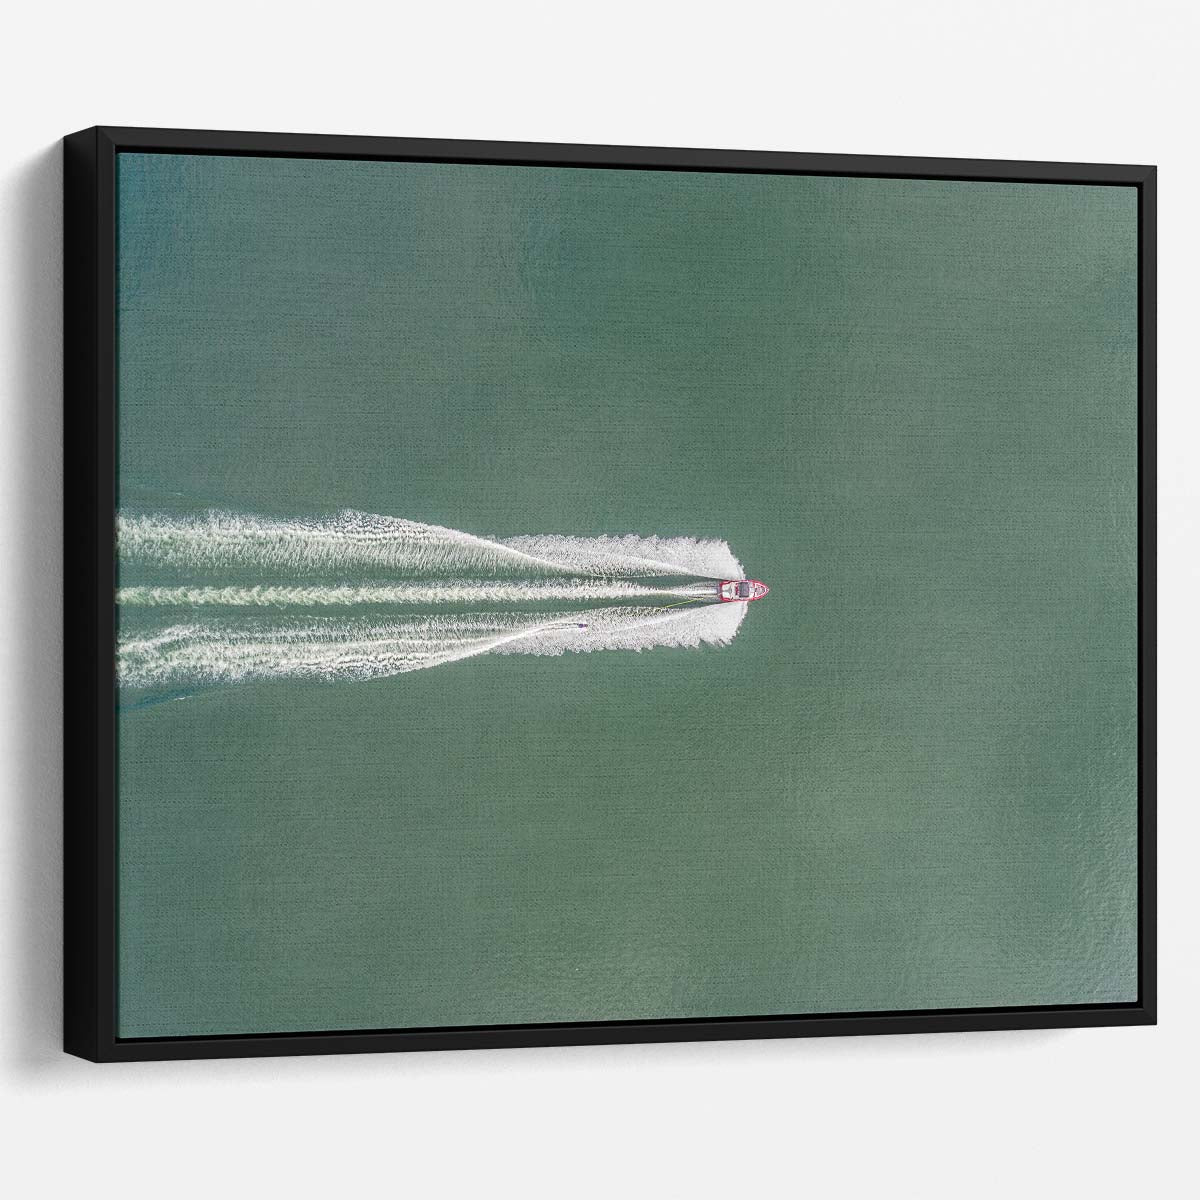 Speedboat Race Minimalist Aerial Seascape Wall Art by Luxuriance Designs. Made in USA.